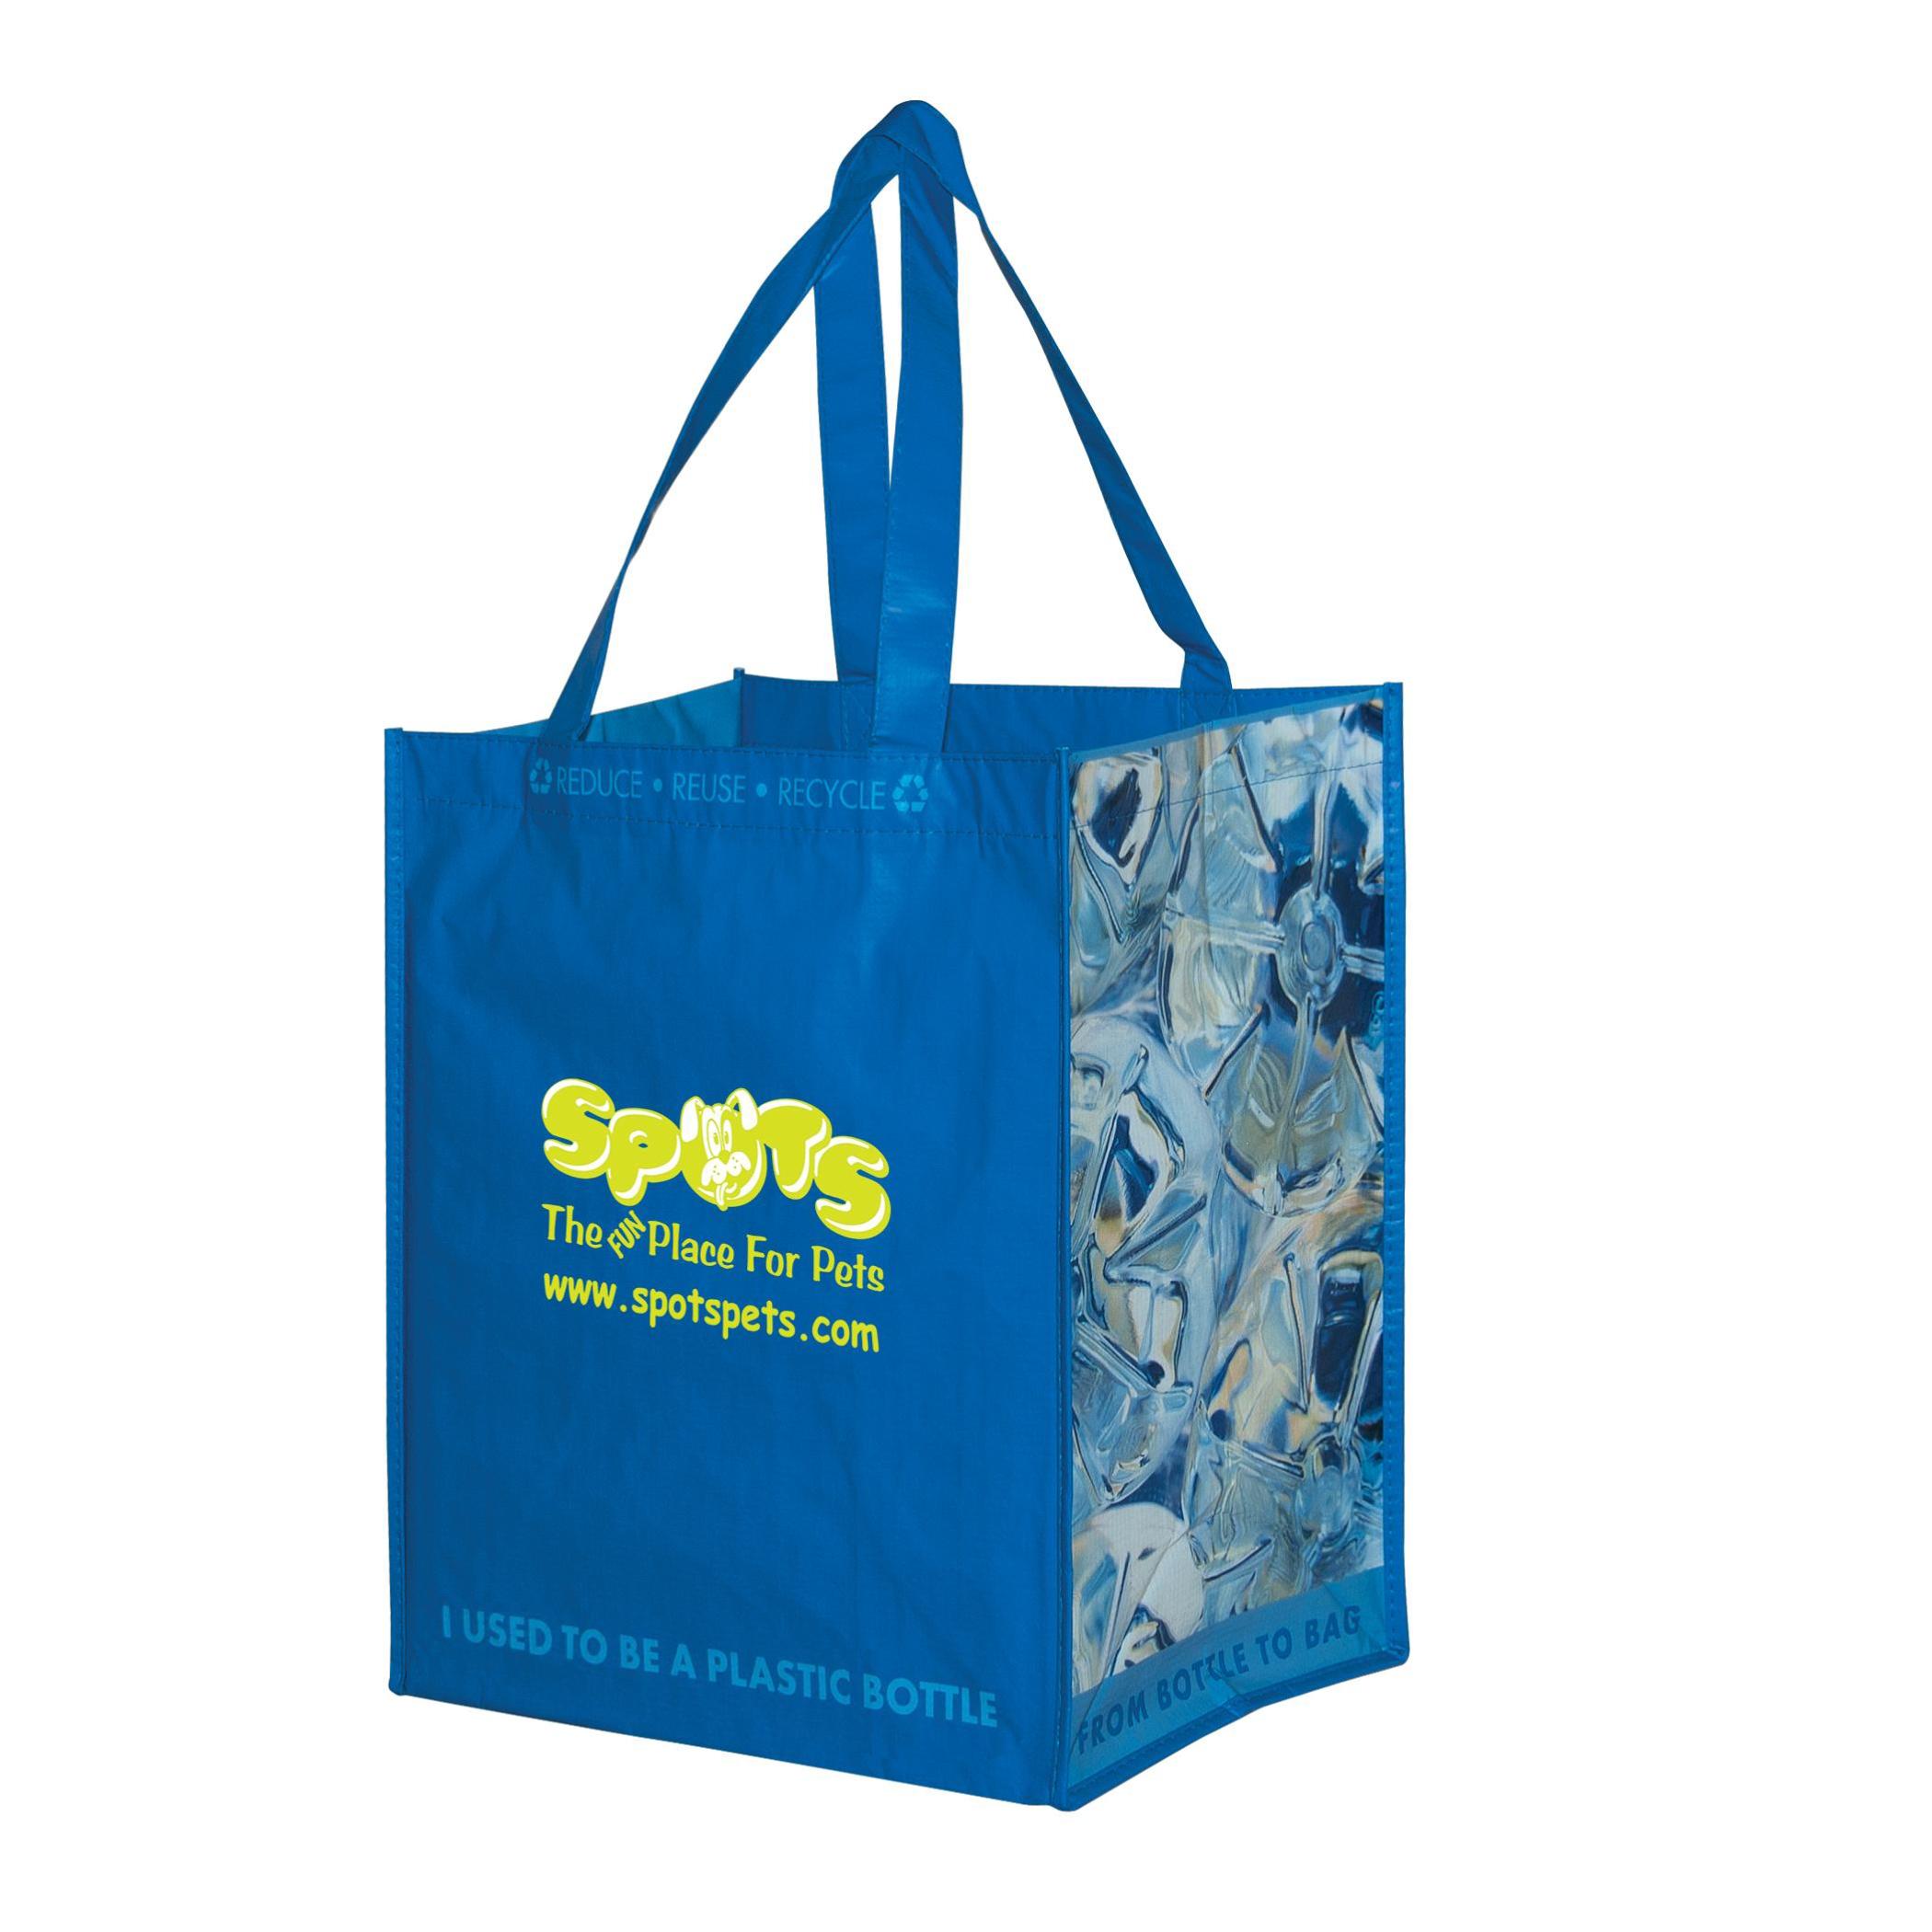 RPET Laminated Grocery Bag | Custom Green Promos | Recycled Totes